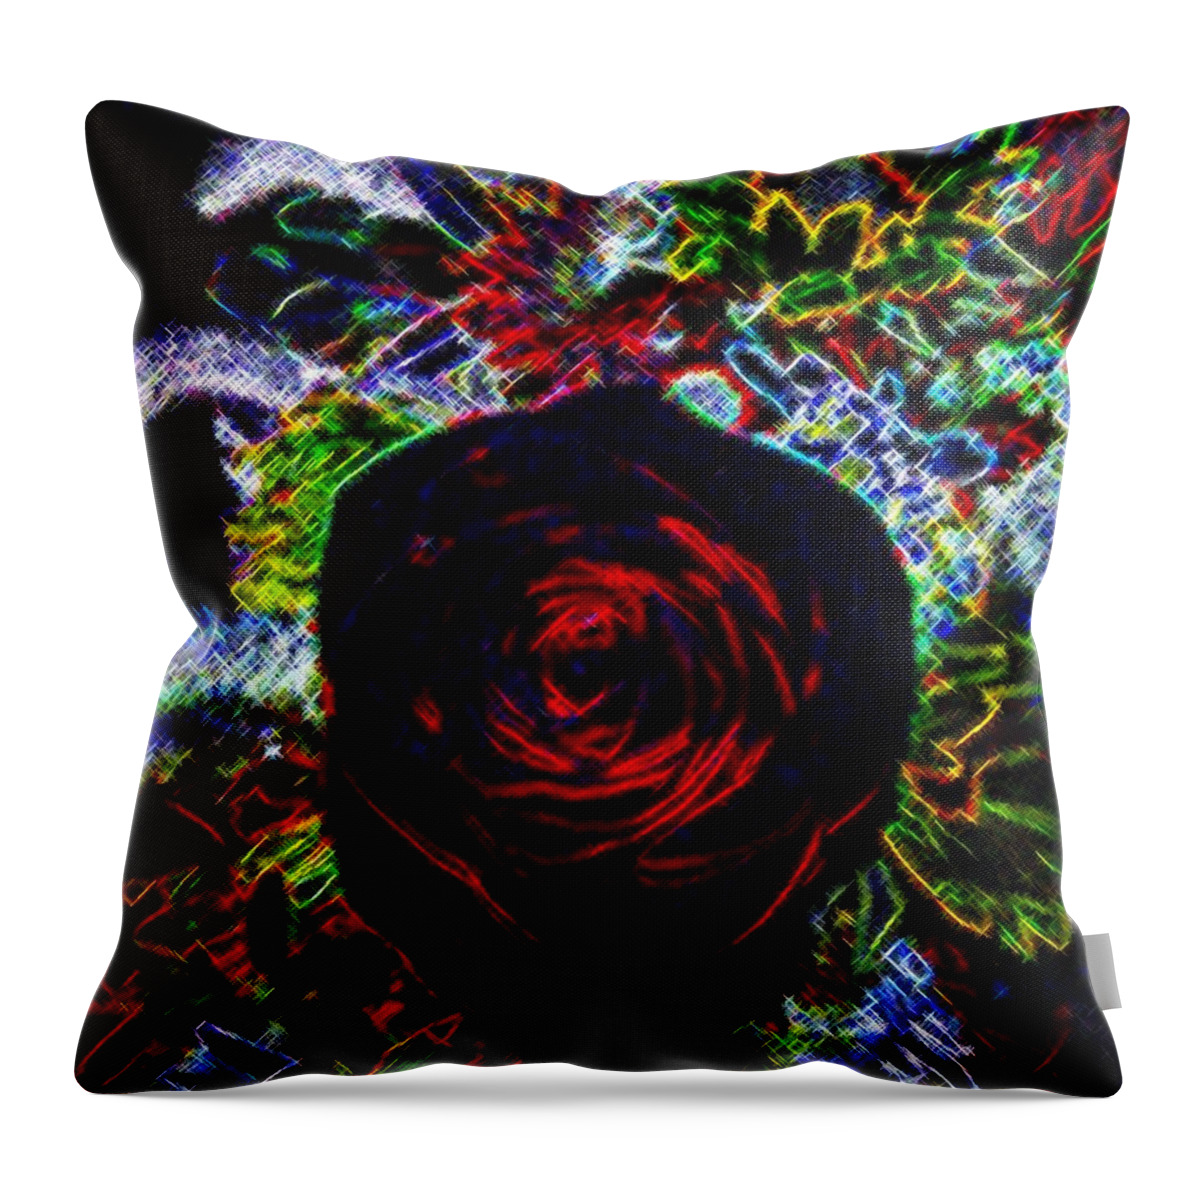 Micro Linear Throw Pillow featuring the digital art Micro Linear 34 by Will Borden